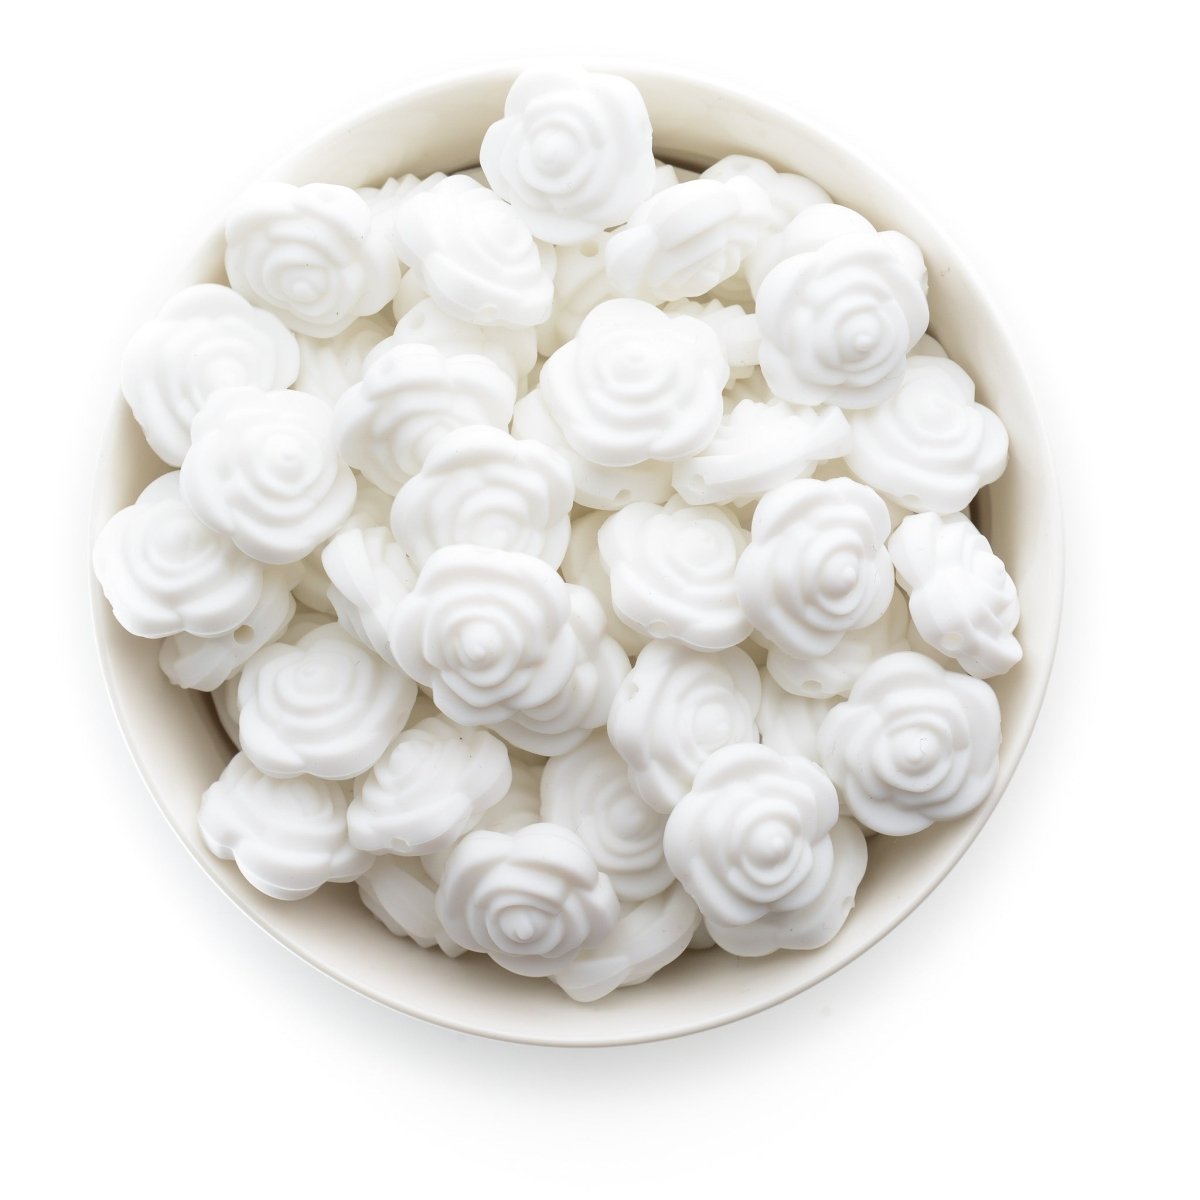 Silicone Focal Beads Roses White from Cara & Co Craft Supply